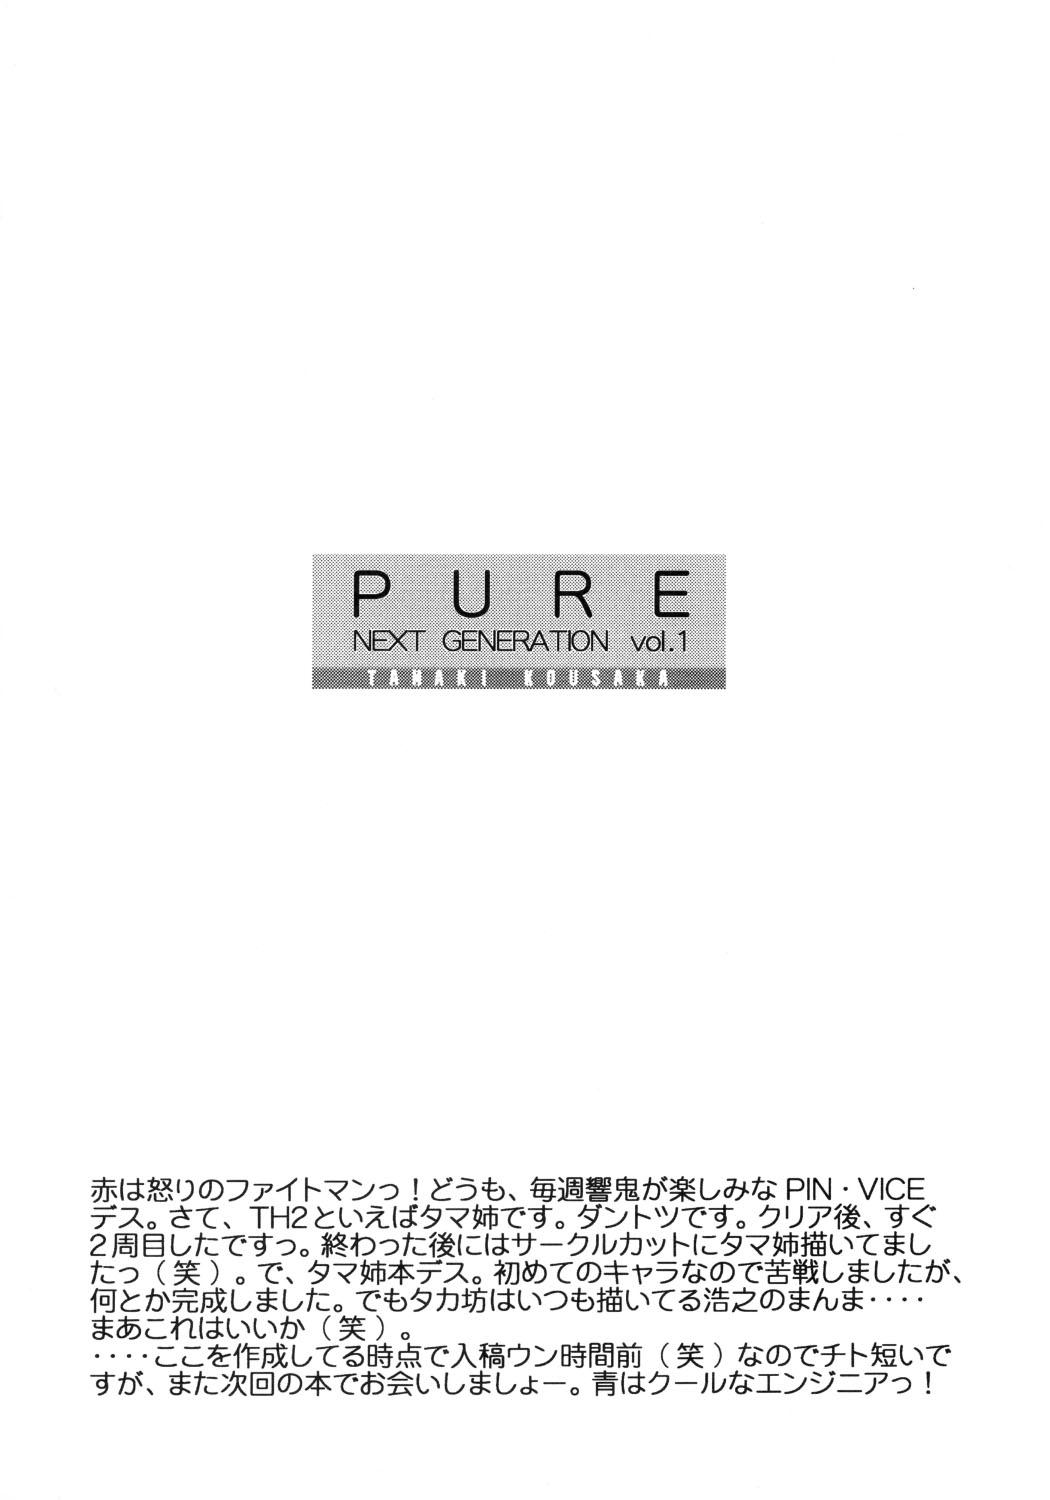 Girlongirl PURE NEXT GENERATION Vol. 1 - Toheart2 Audition - Page 3